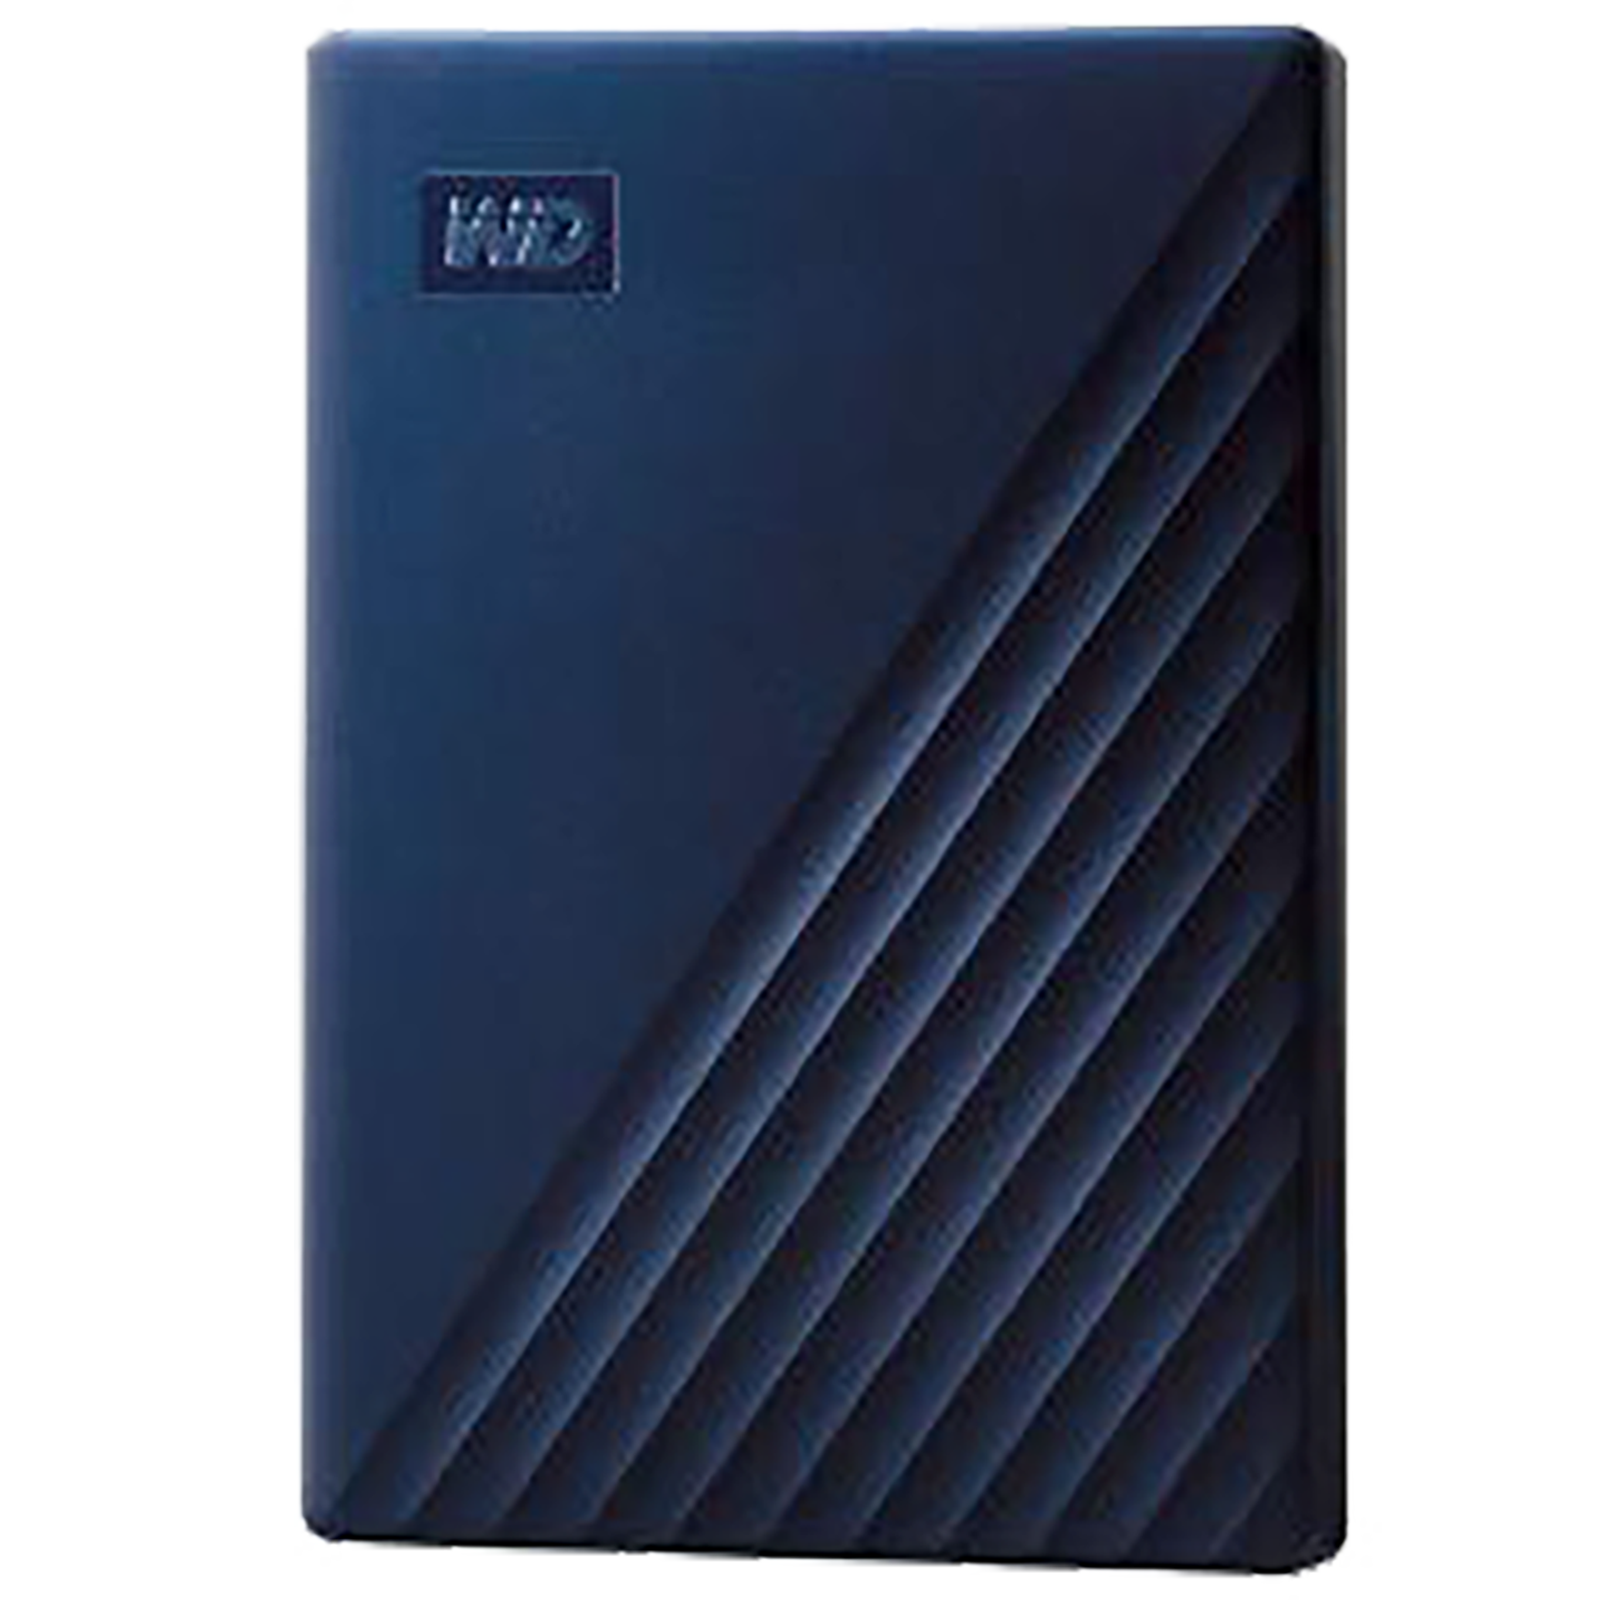 WD - Western Digital My Passport For Mac 2 TB USB 2.0/3.0 Hard Disk Drive (Password Protection, WDBA2D0020BBL-WESN, Blue)